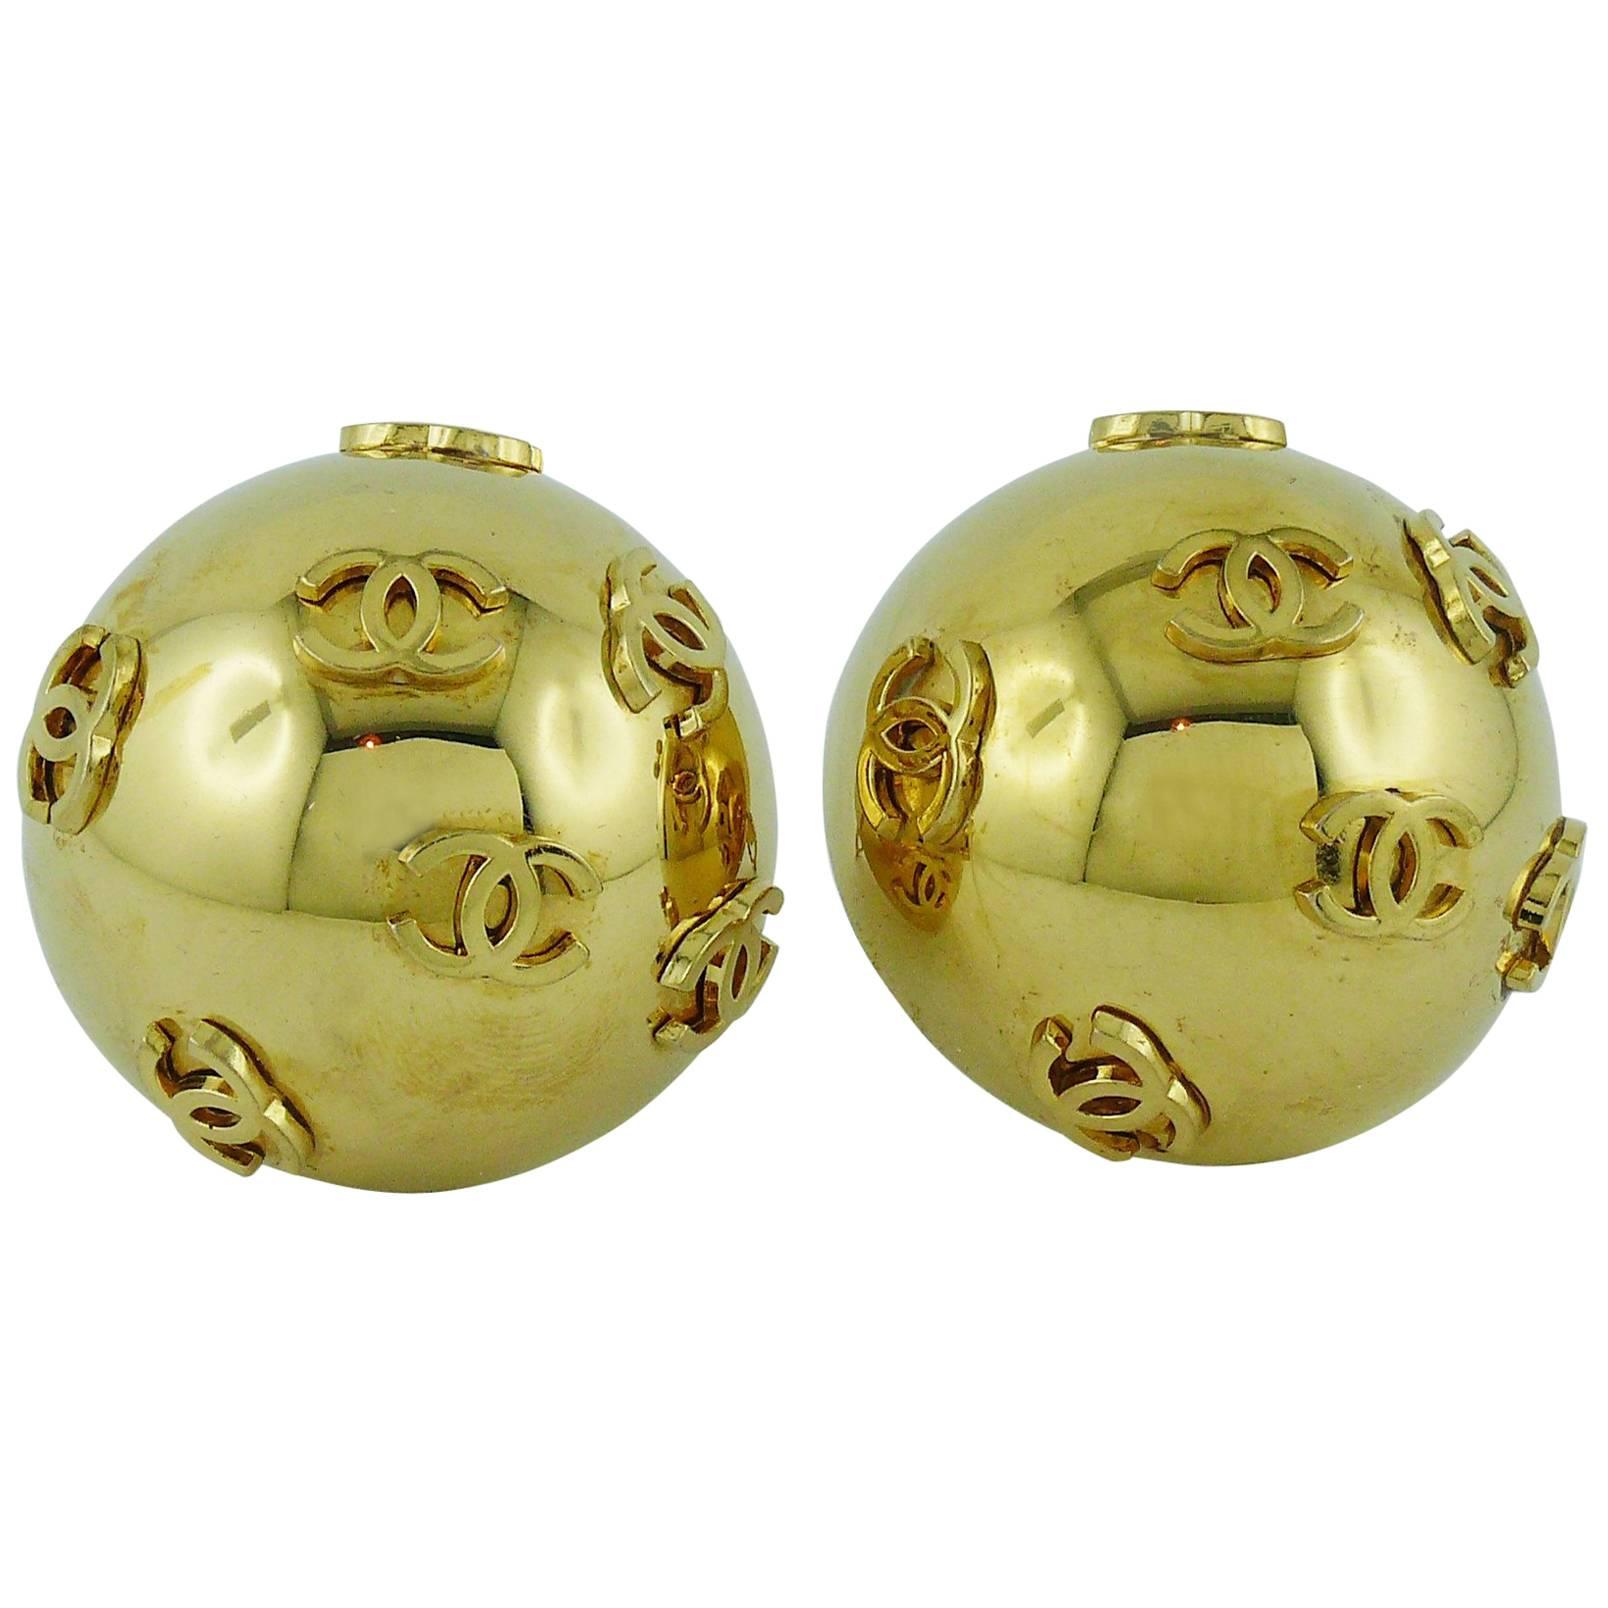 Chanel Vintage 1992 Oversized Dome Clip-On Earrings with CC Logos